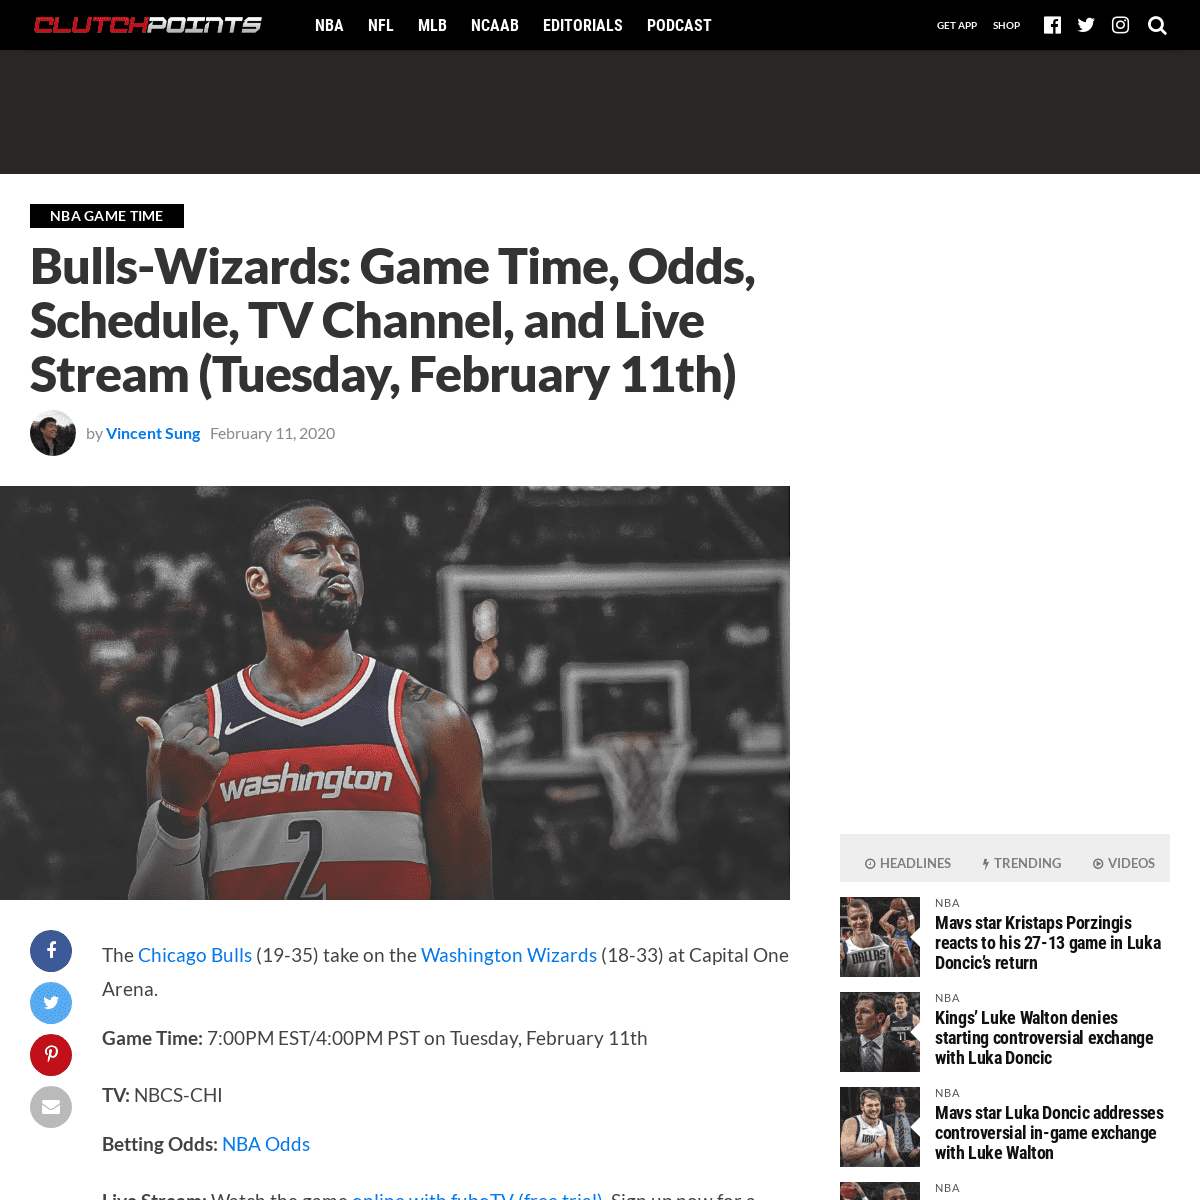 A complete backup of clutchpoints.com/bulls-wizards-game-time-odds-schedule-tv-channel-and-live-stream-tuesday-february-11th/